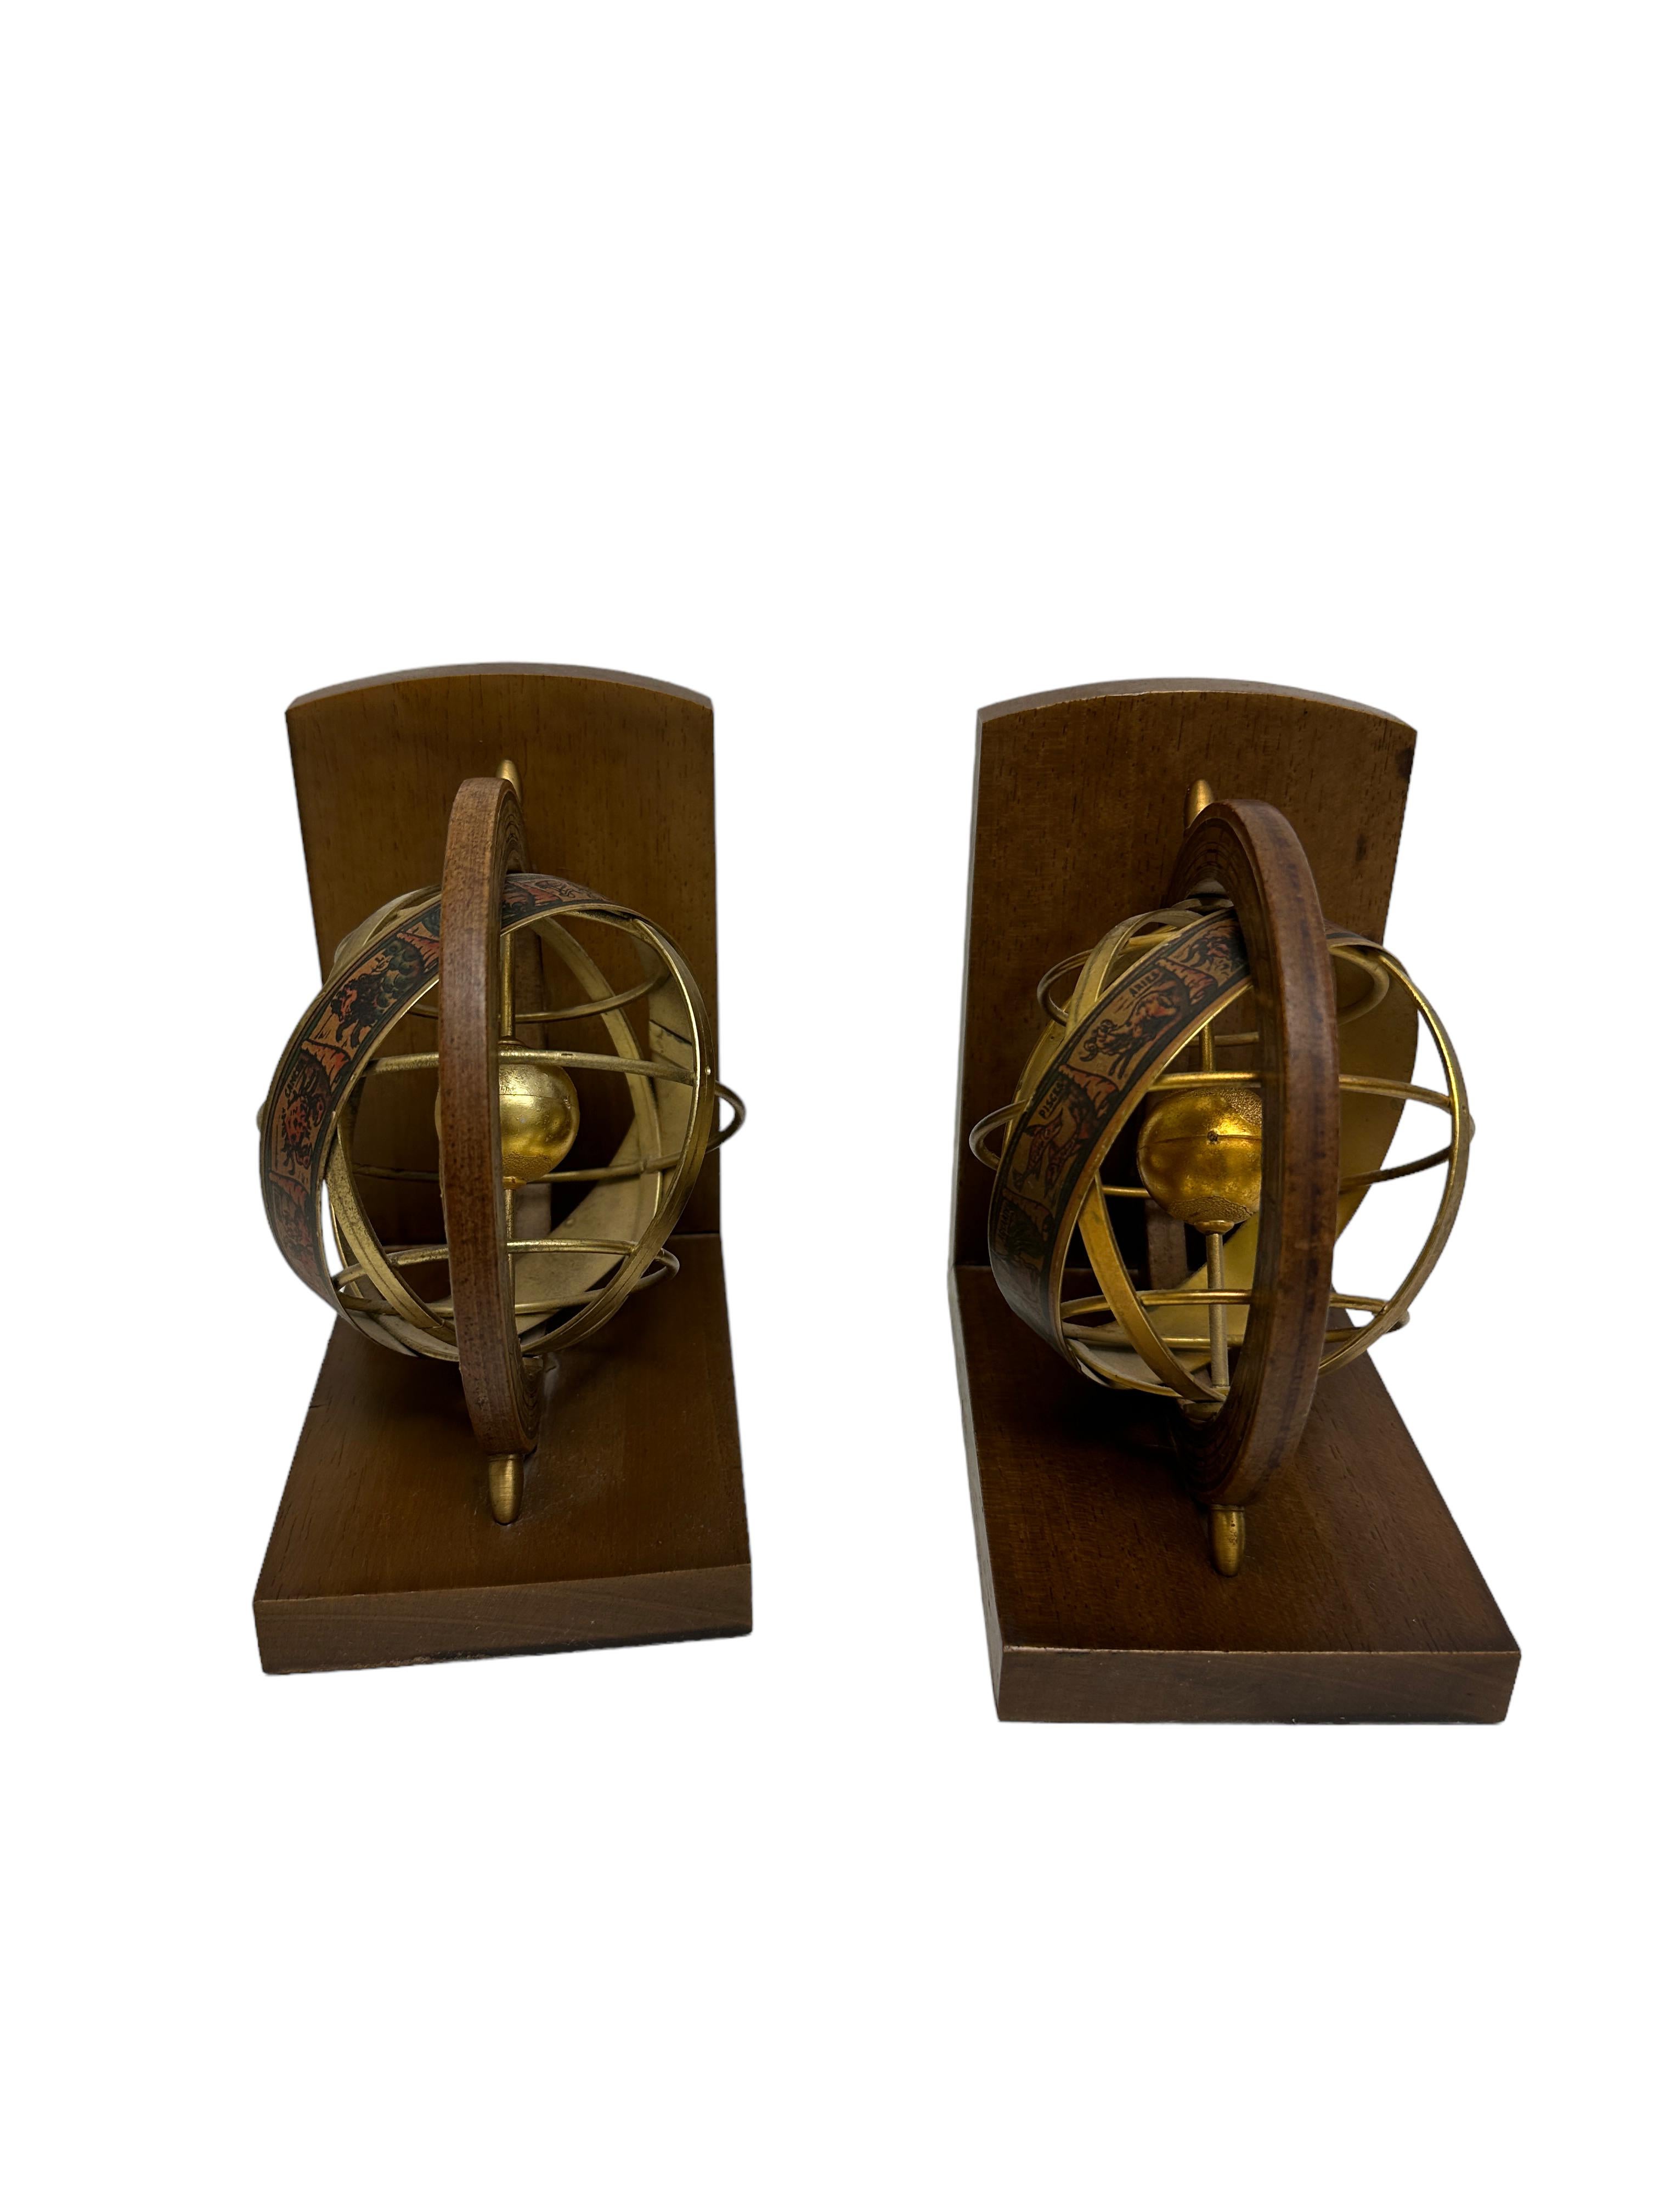 how to build armillary on ship